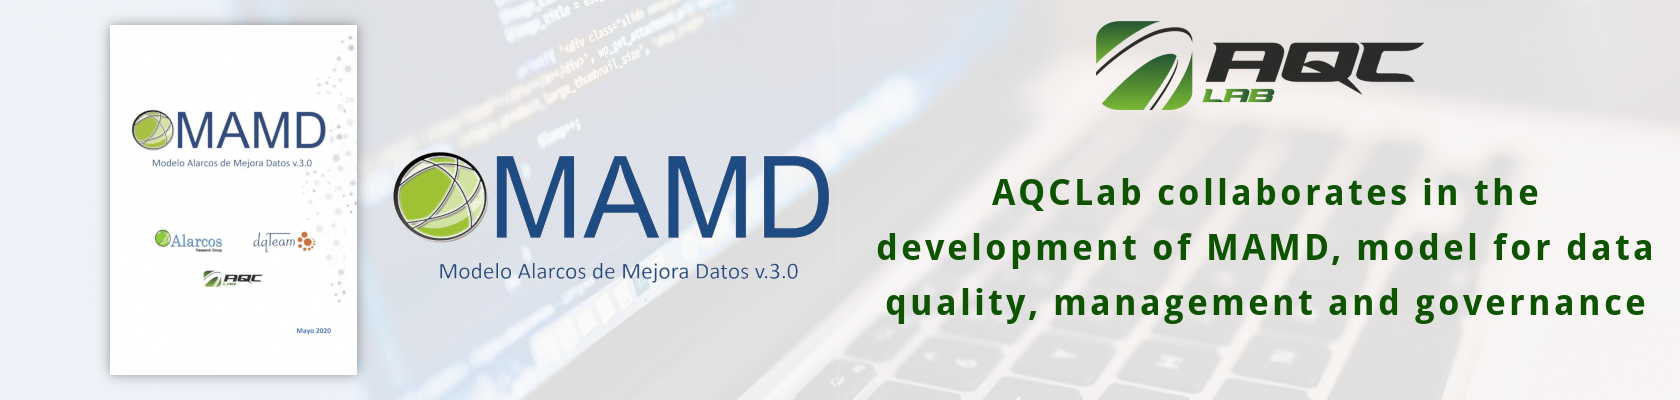 [MAY 2020] AQCLab collaborates in the development of the new MAMD model for data quality, management and governance